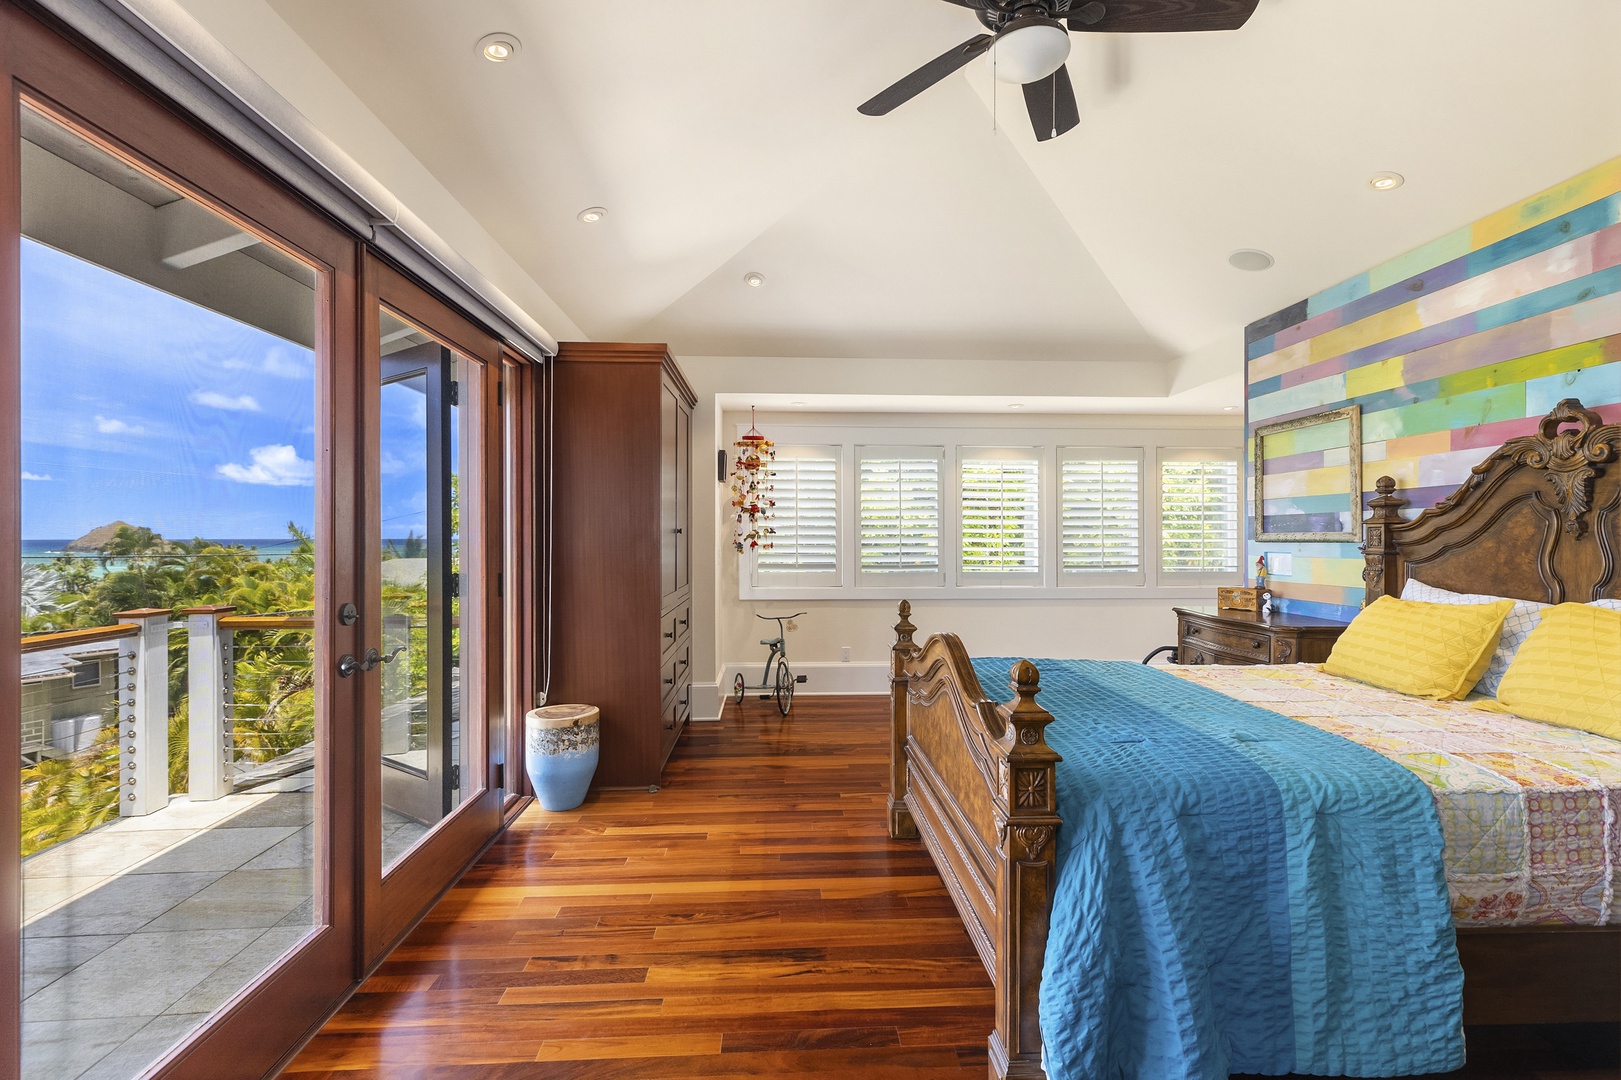 Kailua Vacation Rentals, Lanikai Villa* - Guest Bedroom 2 is furnished with a king bed, ocean views, split A/C, ceiling fan, and ensuite bath.